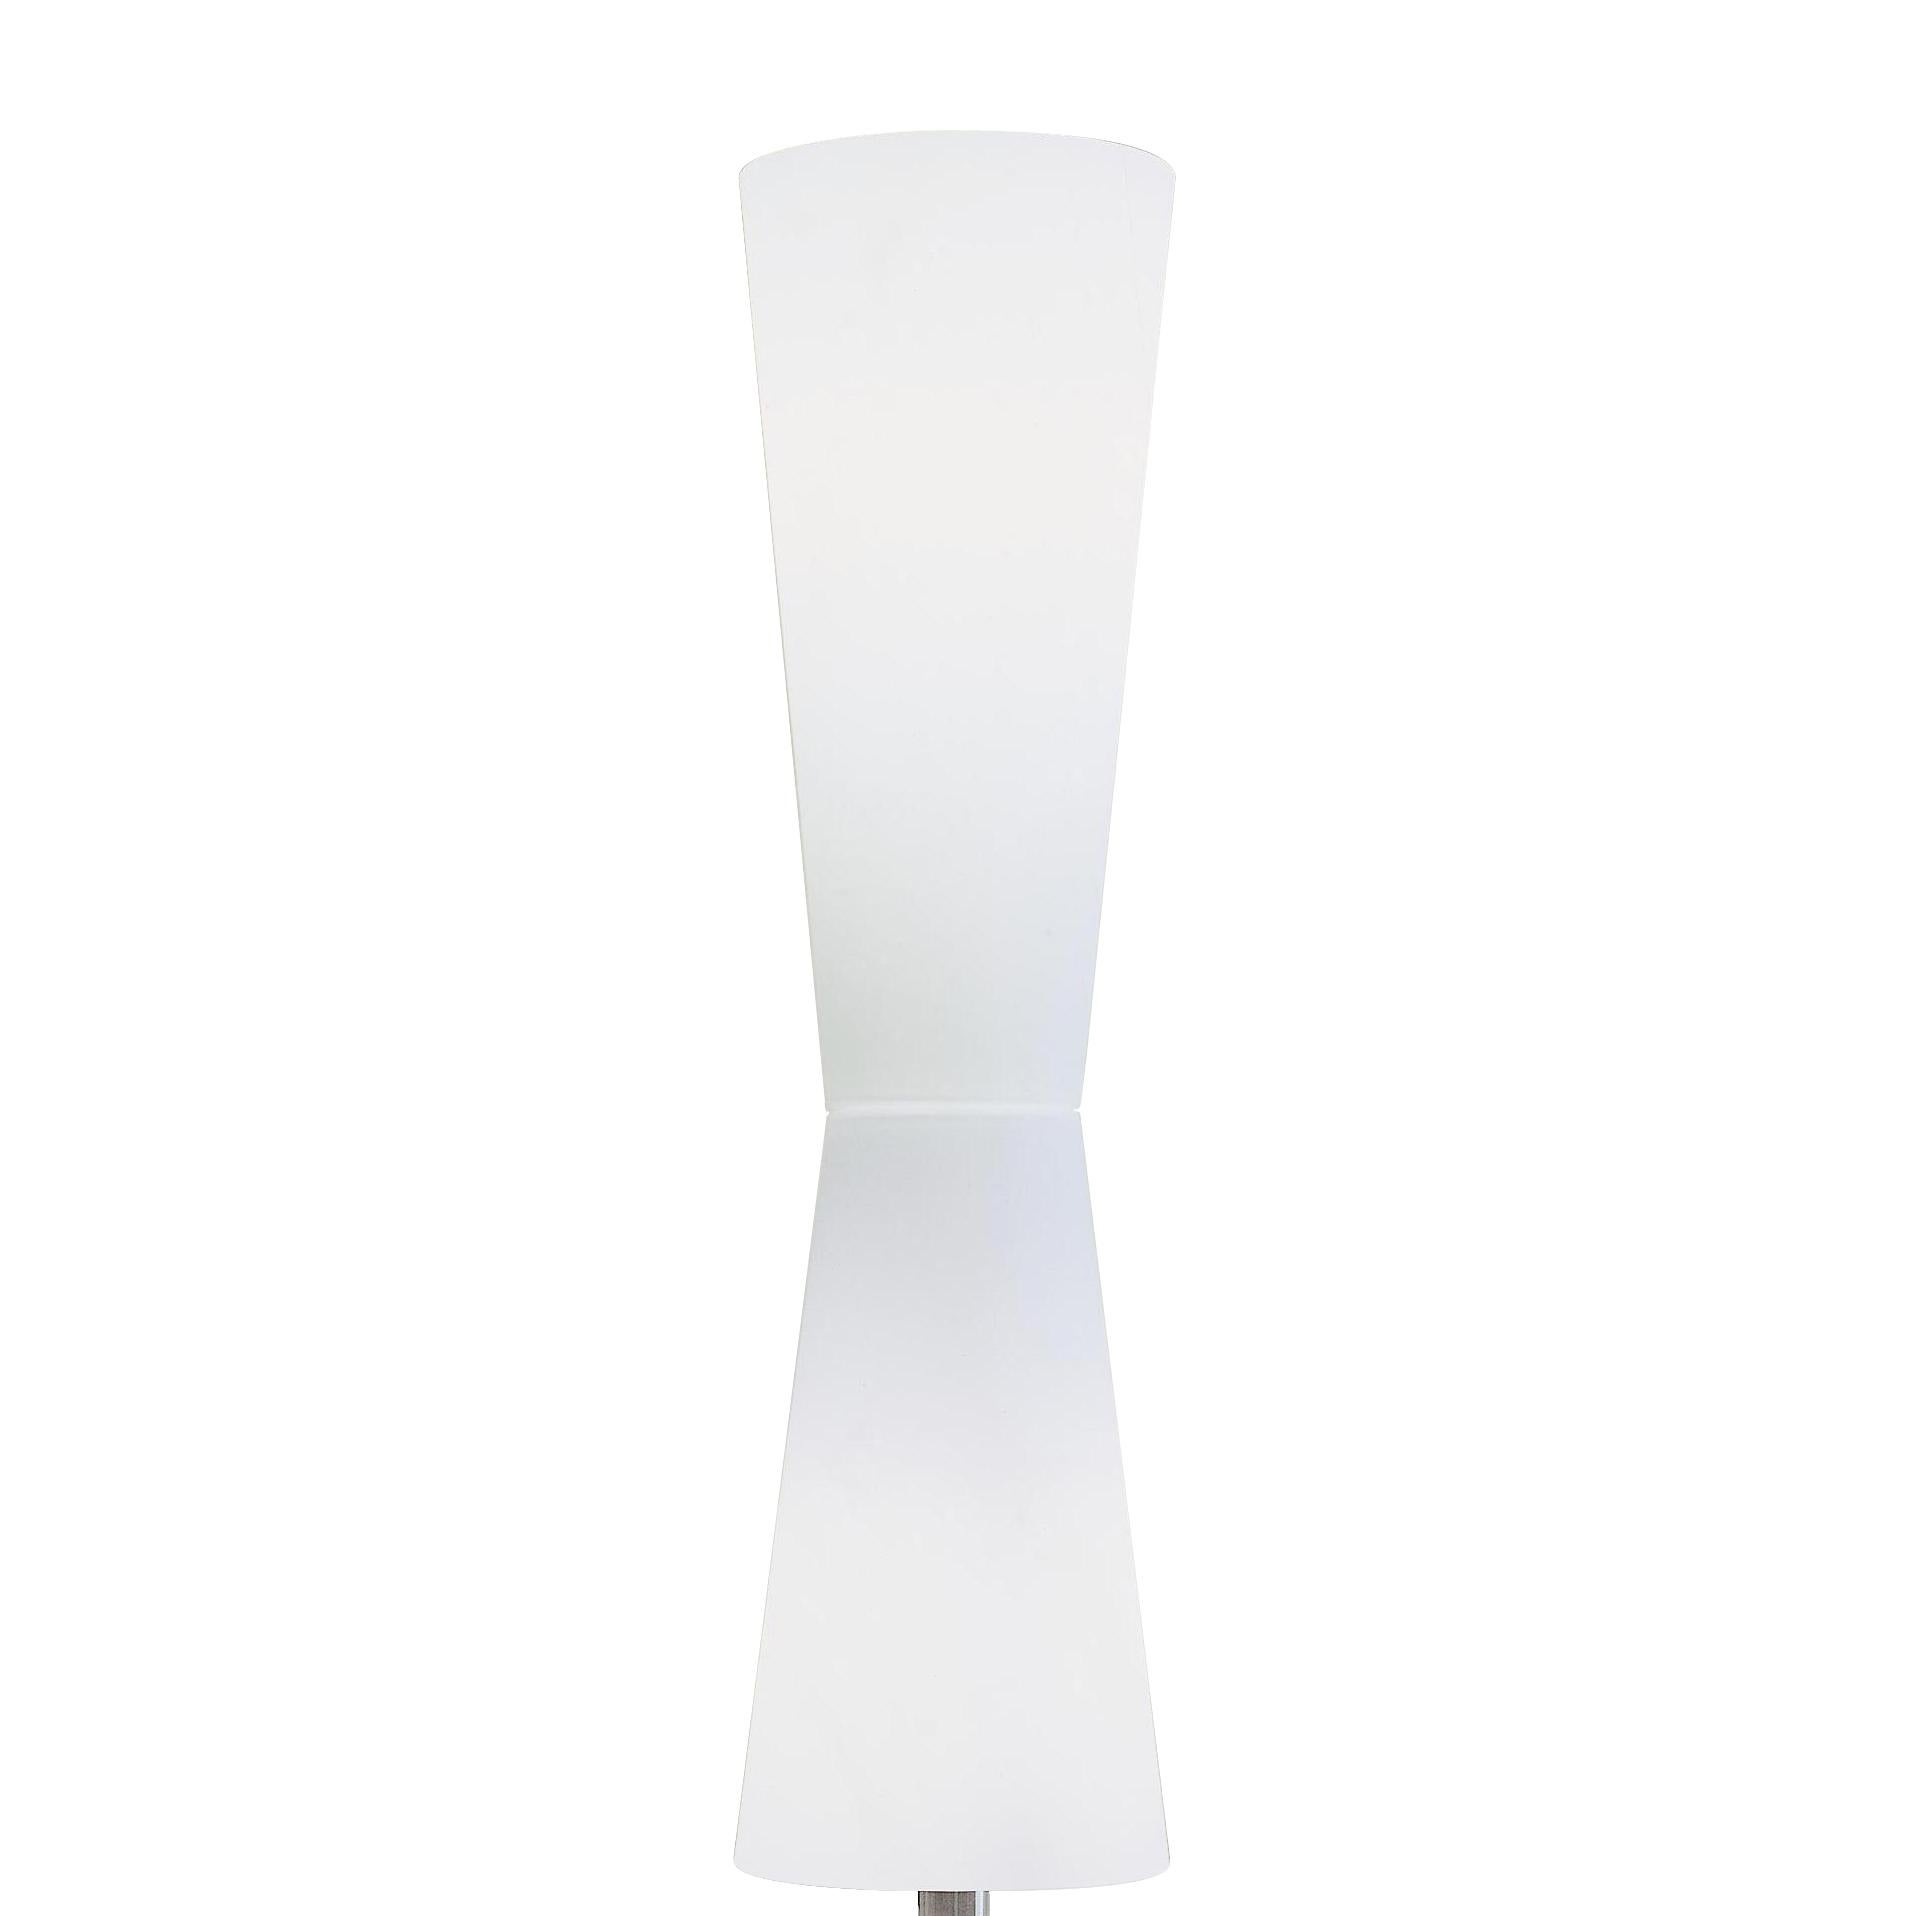 Floor lamp 'Lu-Lu' designed by Stefano Casciani in 1996.
Floor lamp with Murano glass diffuser and brushed metal base.Manufactured by Oluce, Italy.

The geometries chosen by Stefano Casciani when designing the Lu-Lu lamp are Primitive, light, pure